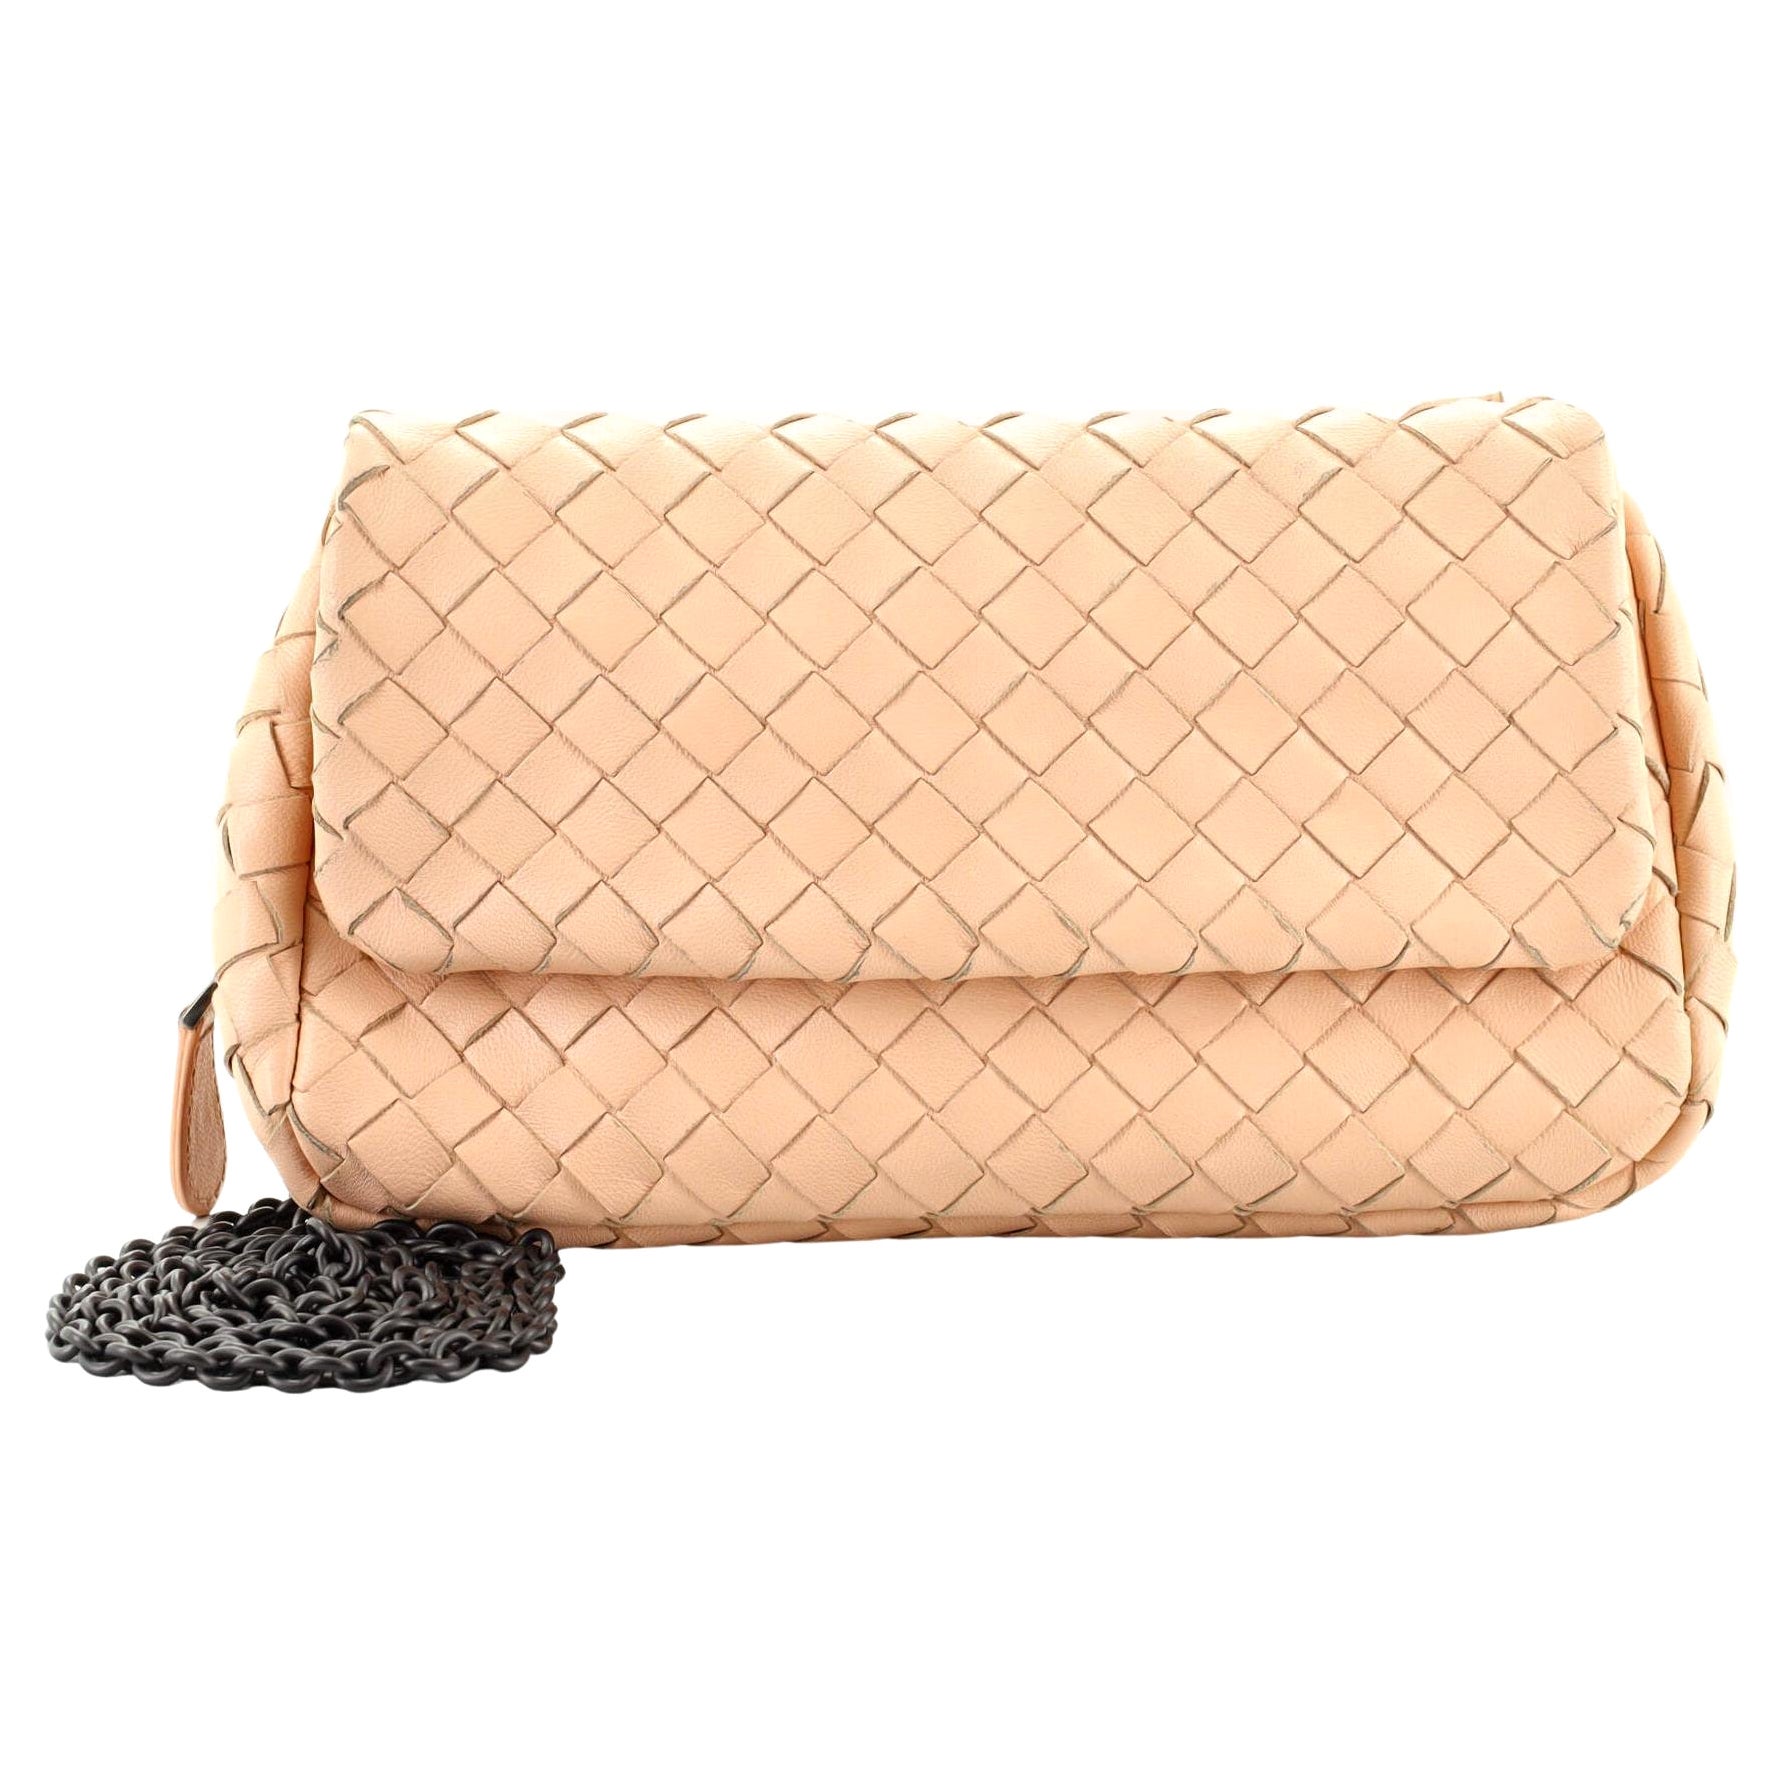 nude chanel clutch